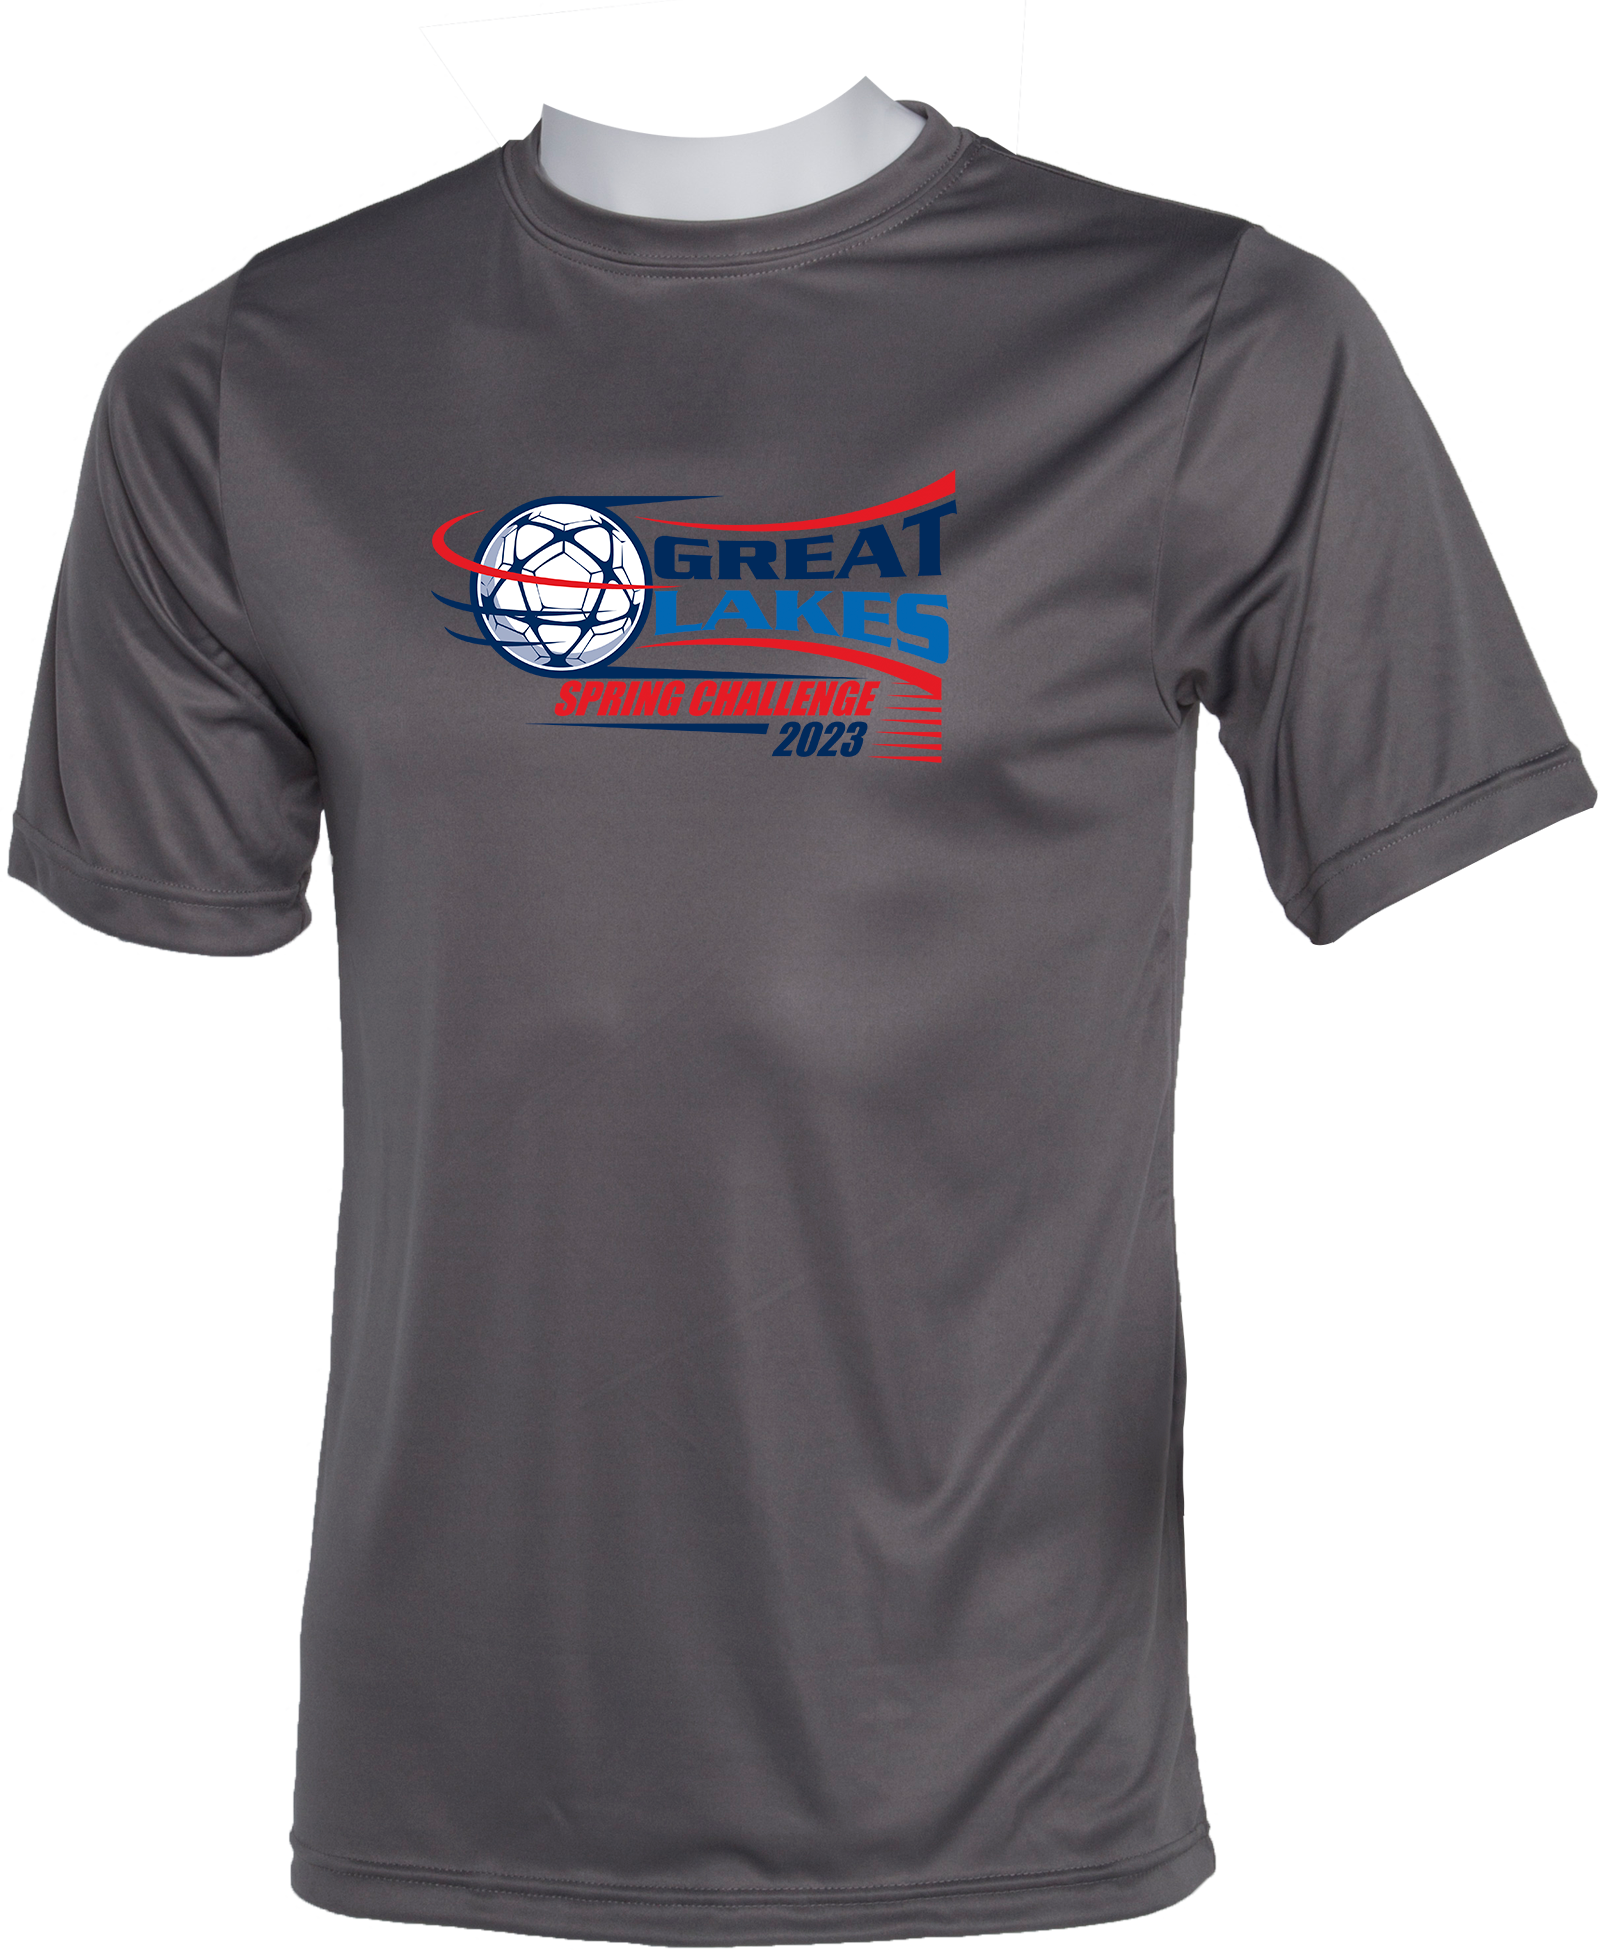 PERFORMANCE SHIRTS - 2023 Great Lakes Spring Challenge